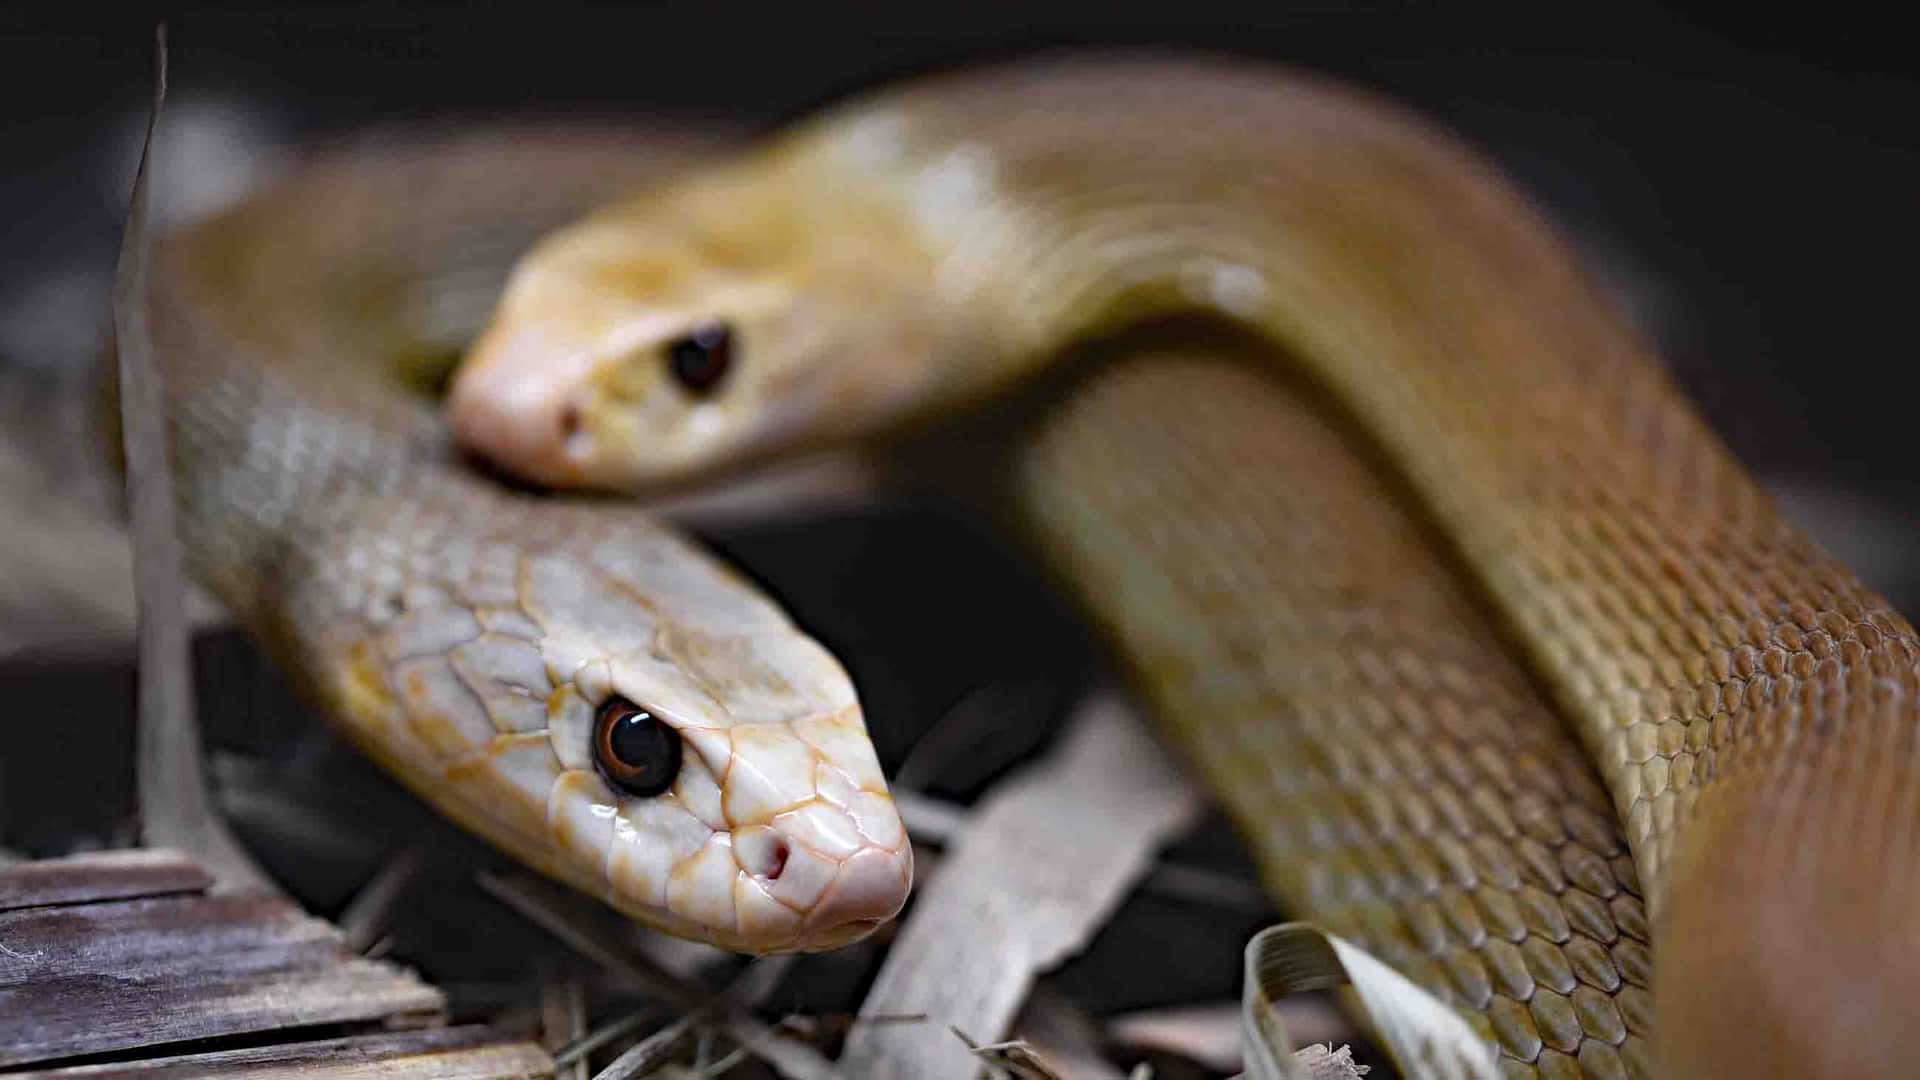 Get up close and personal with Michigan's native snakes!